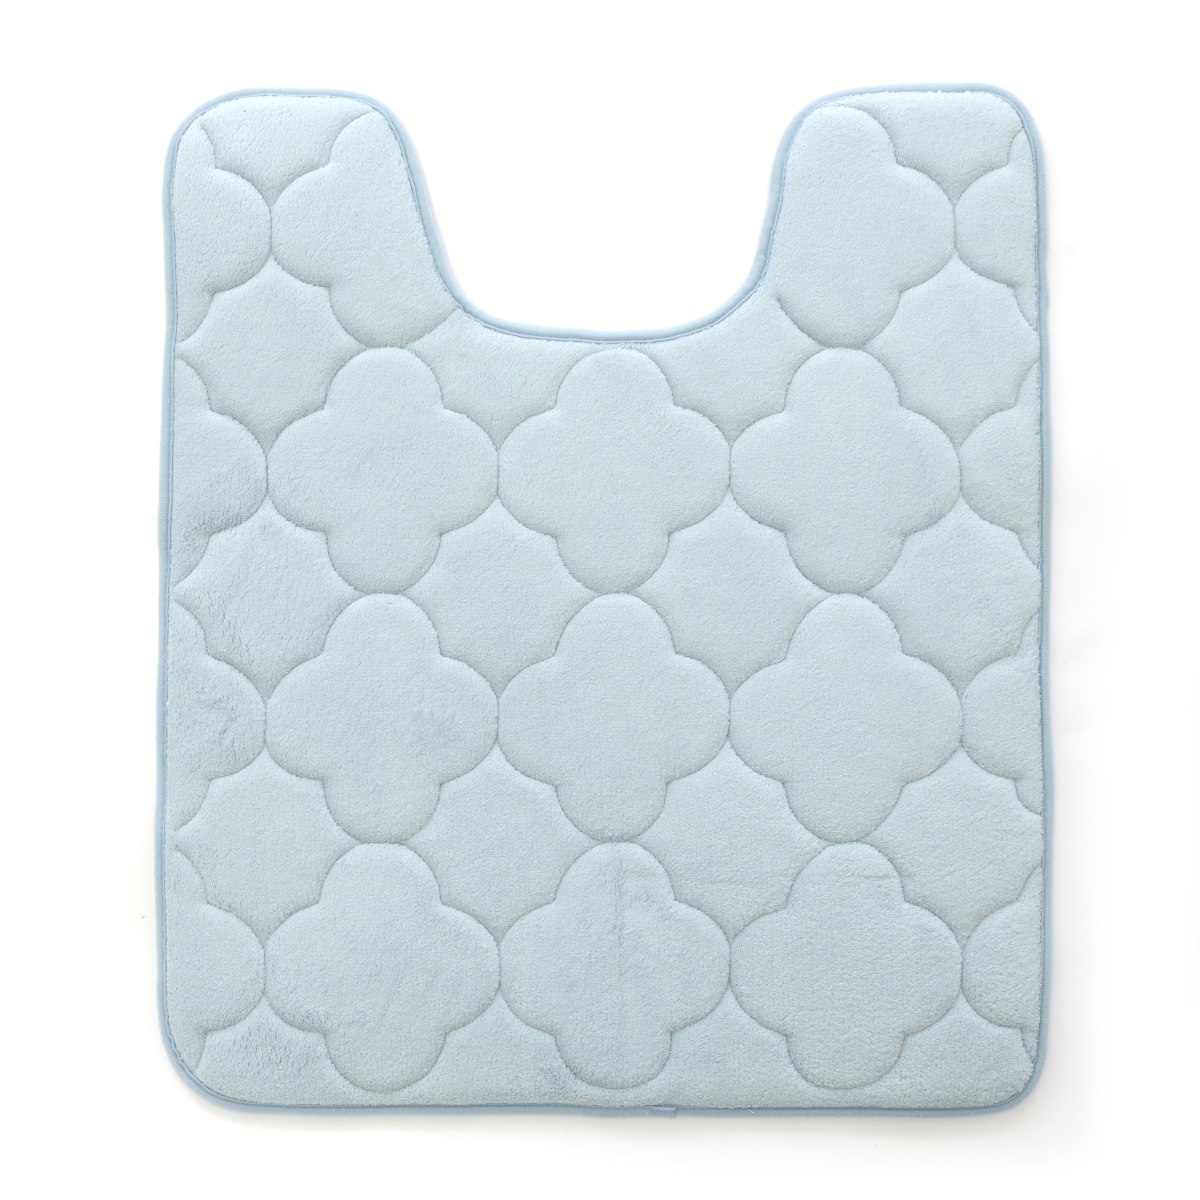 21 X 24 In. Embroidered Memory Foam Contoured Bath Mat - Sterling Blue